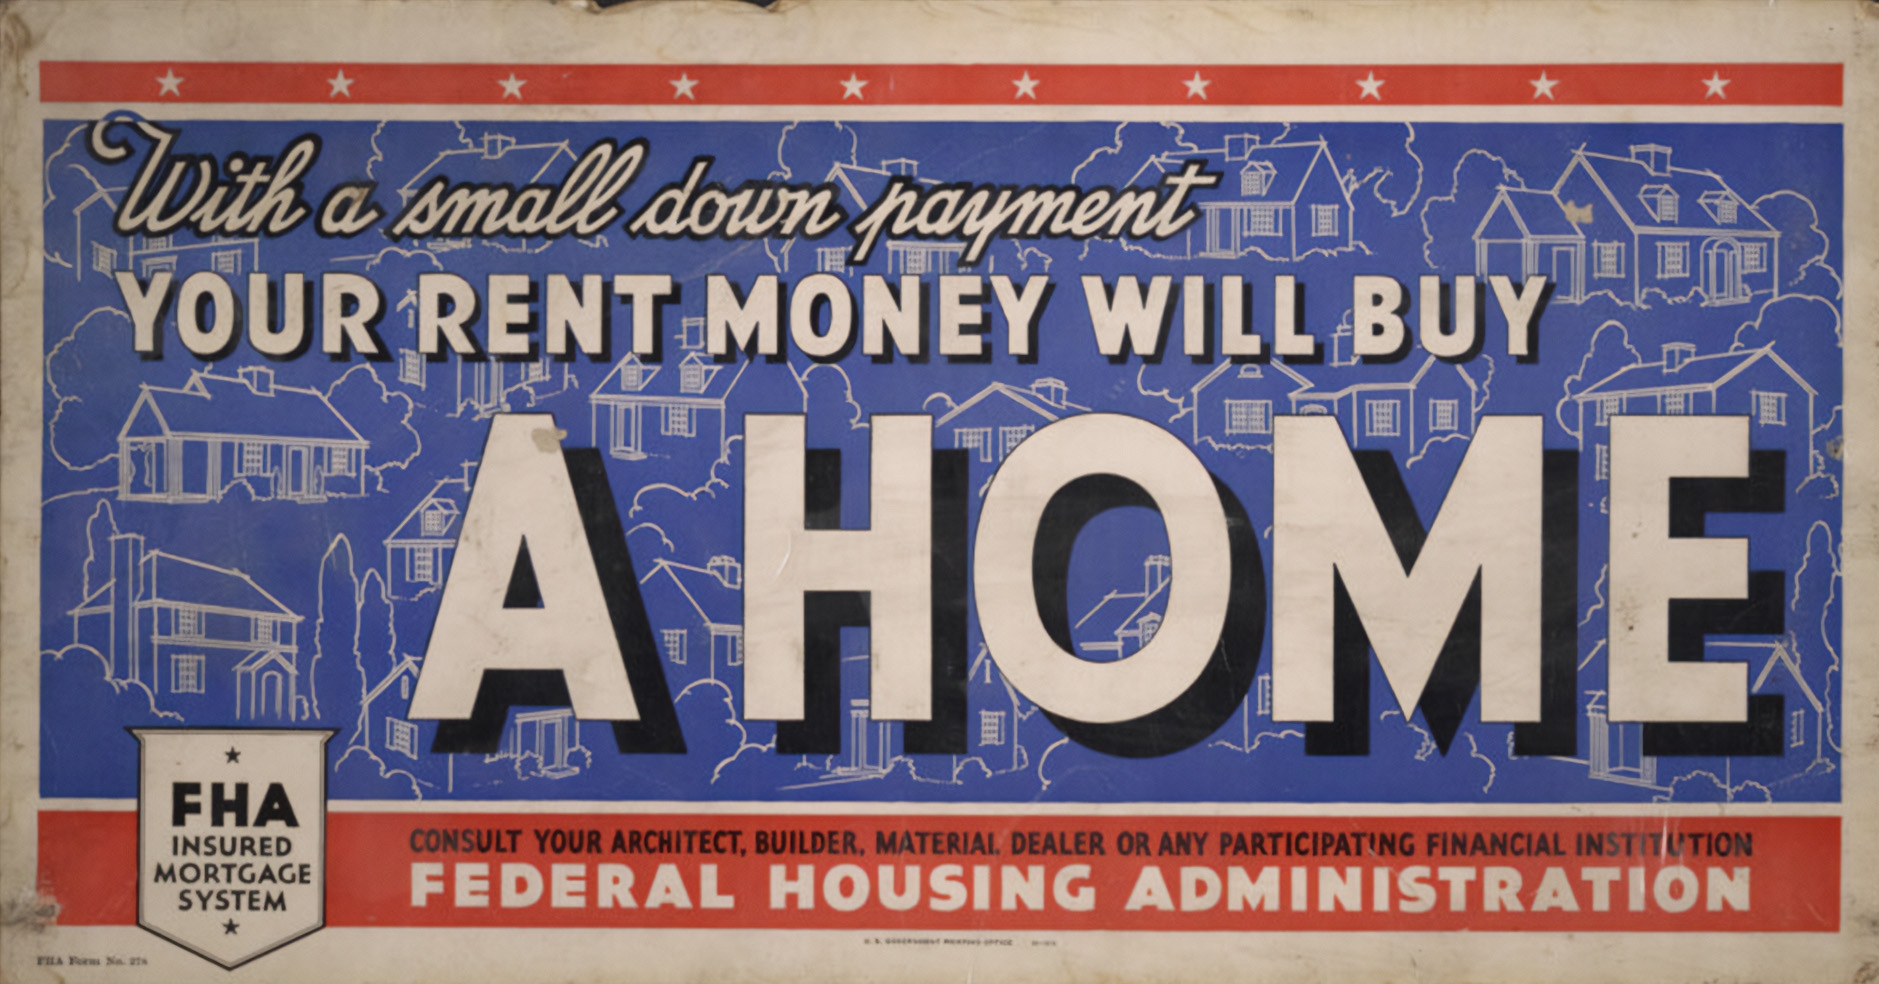 The Federal Housing Authority advertises its home financing program to streetcar riders in Minnesota.